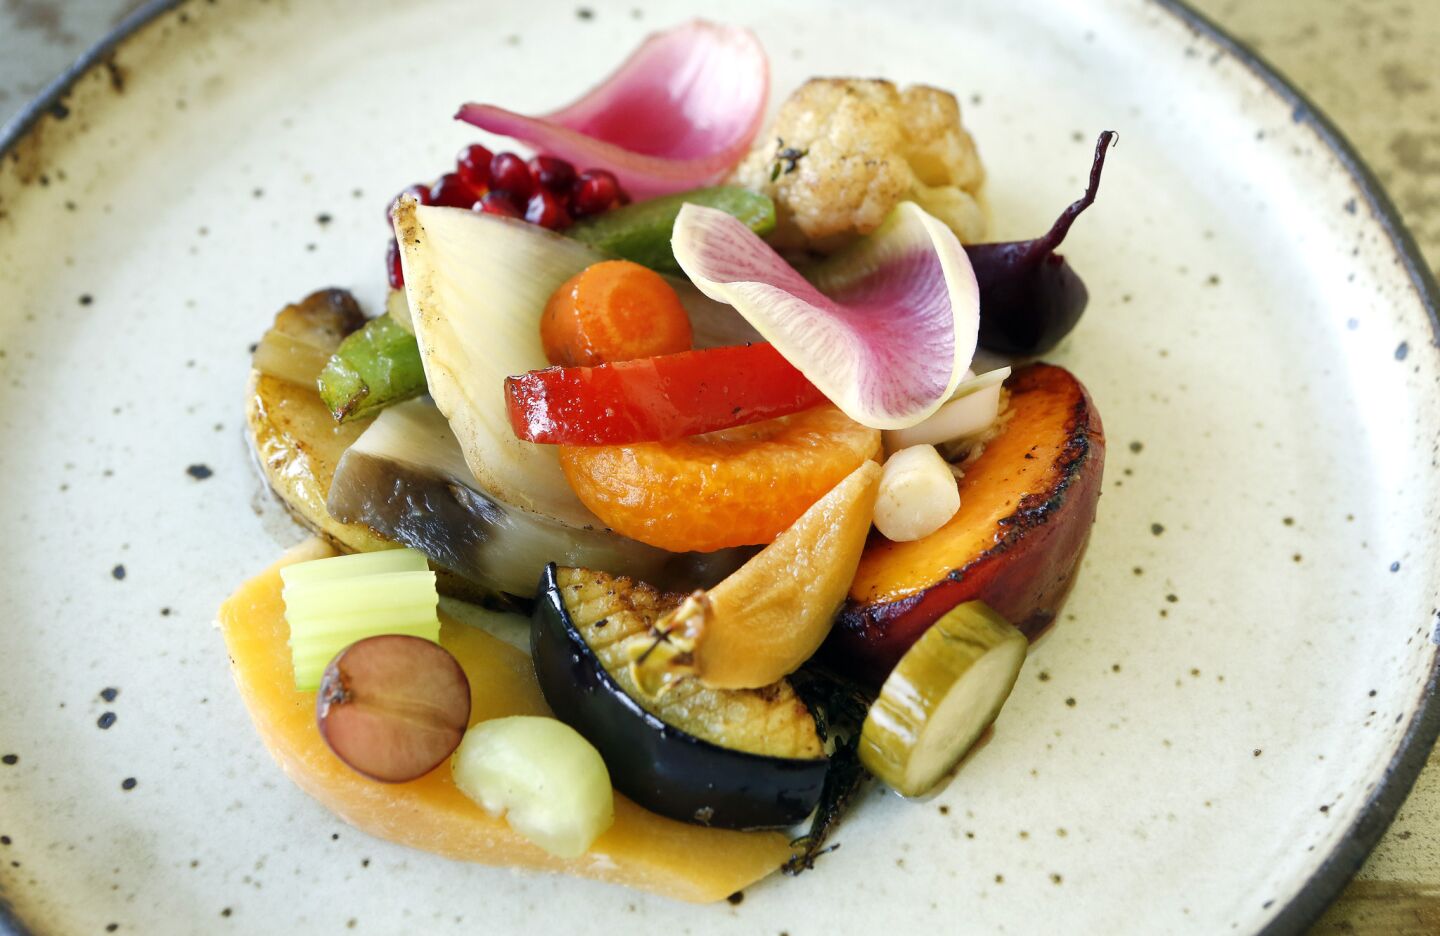 A vegetable-and-fruit plate is on the menu at Le Comptoir, located at the Hotel Normandie on 6th Street in Los Angeles.